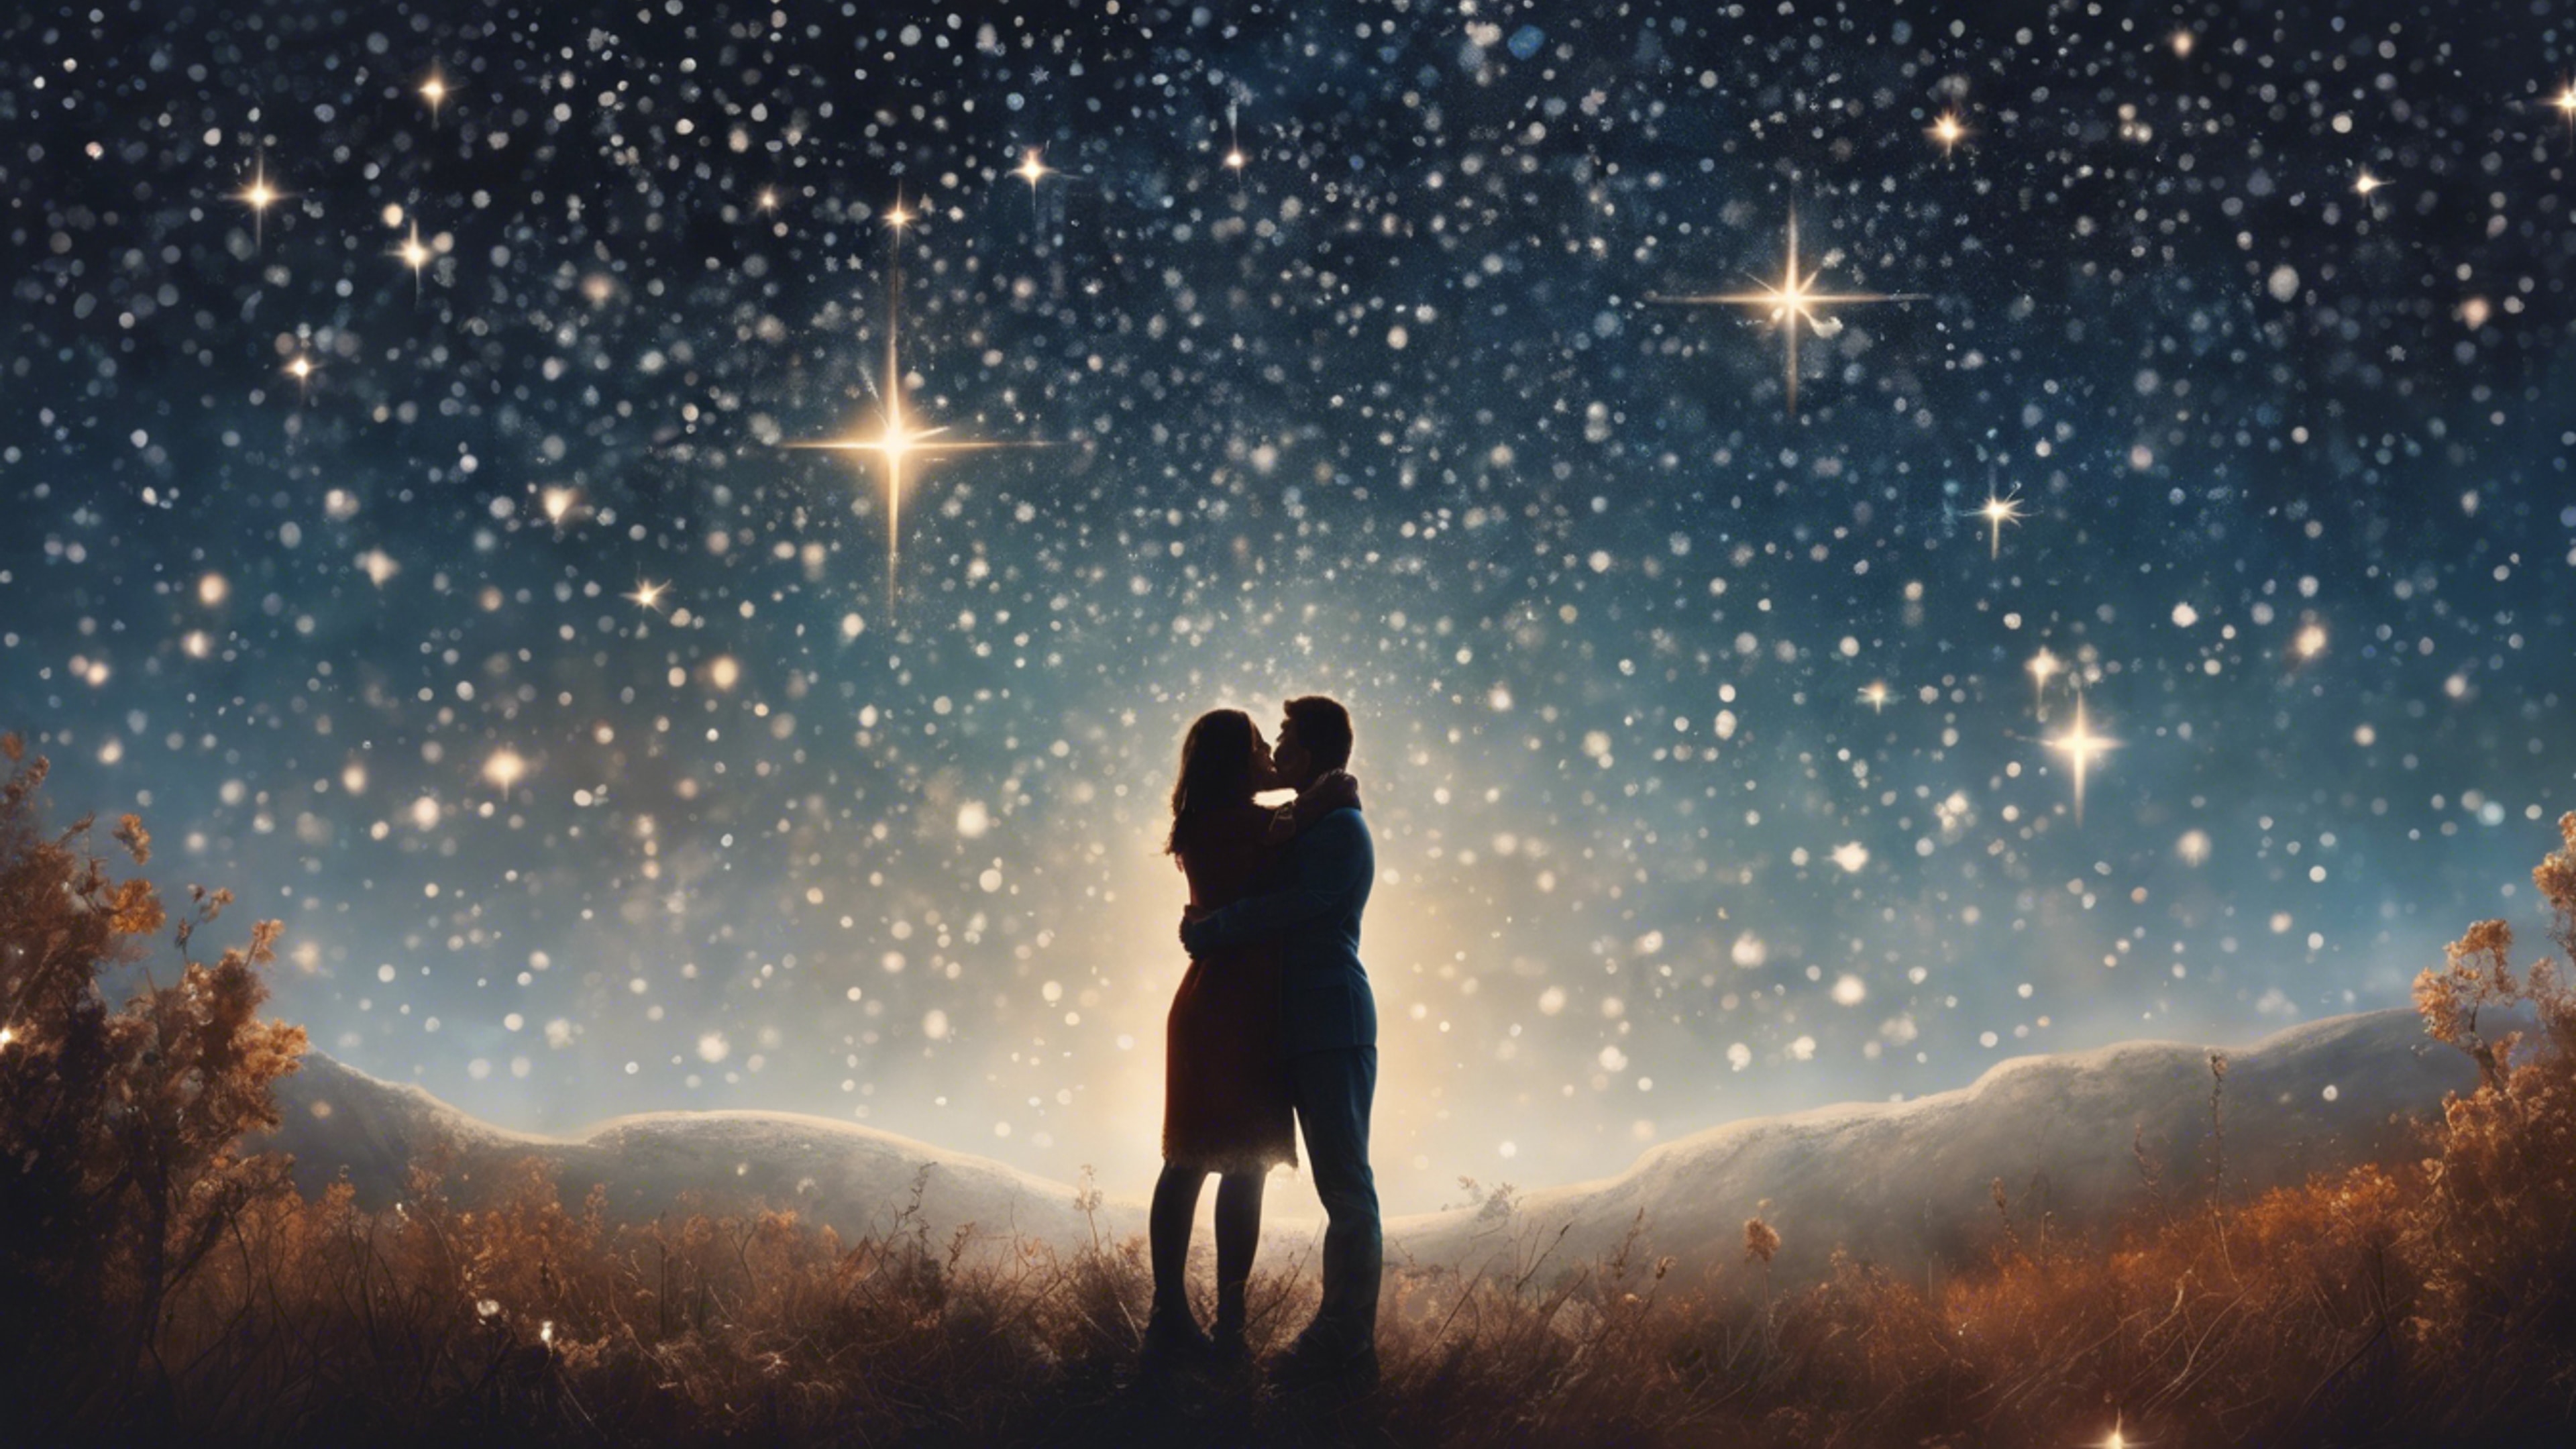 A timeless painting of a couple sharing a romantic moment under a star-filled sky. Tapetai[26fb6f637c3e4c759c8d]